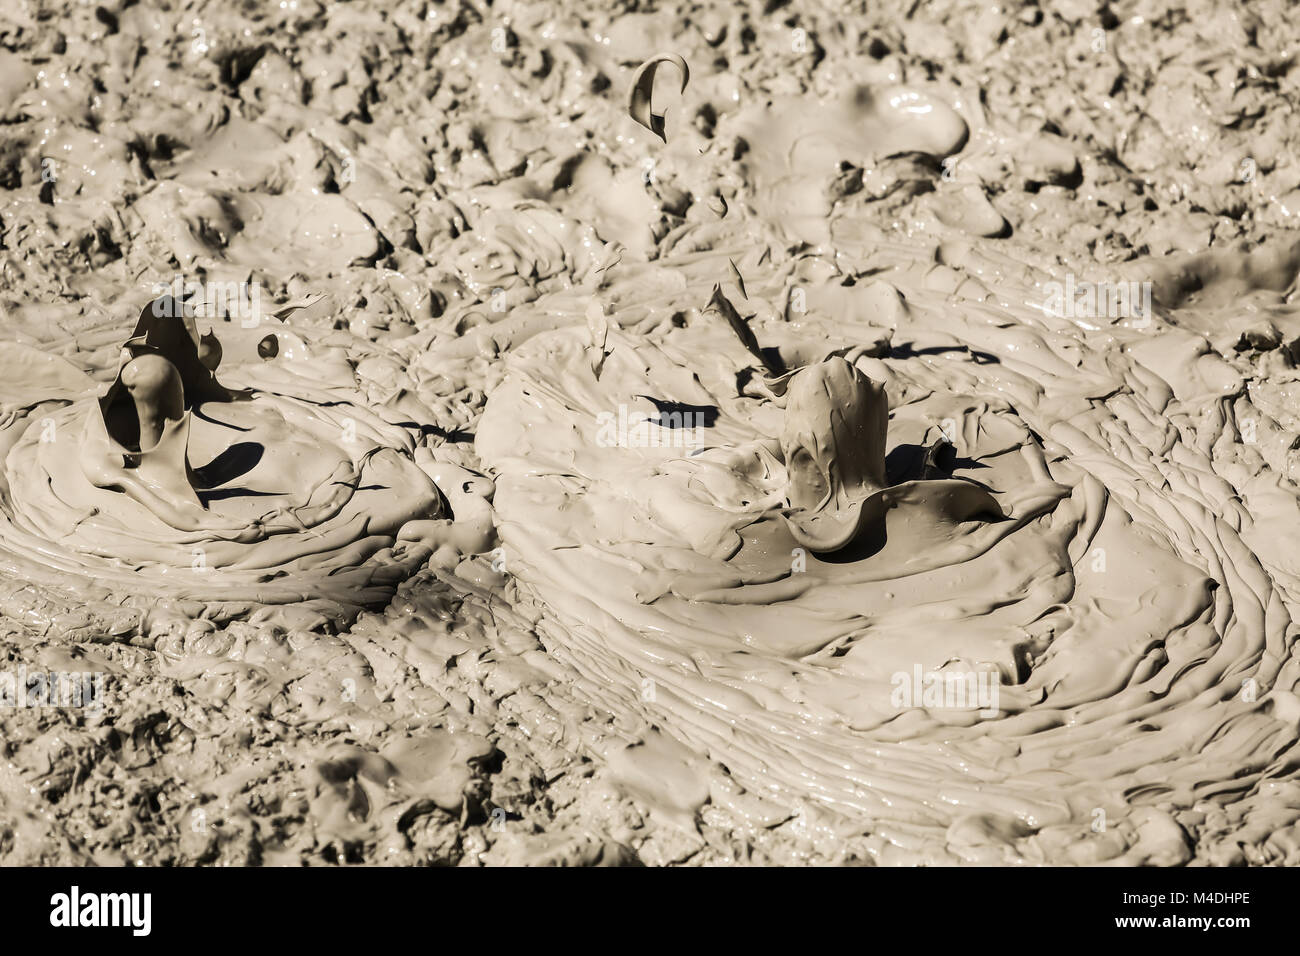 Bubbling mudhole in volcanic area Stock Photo